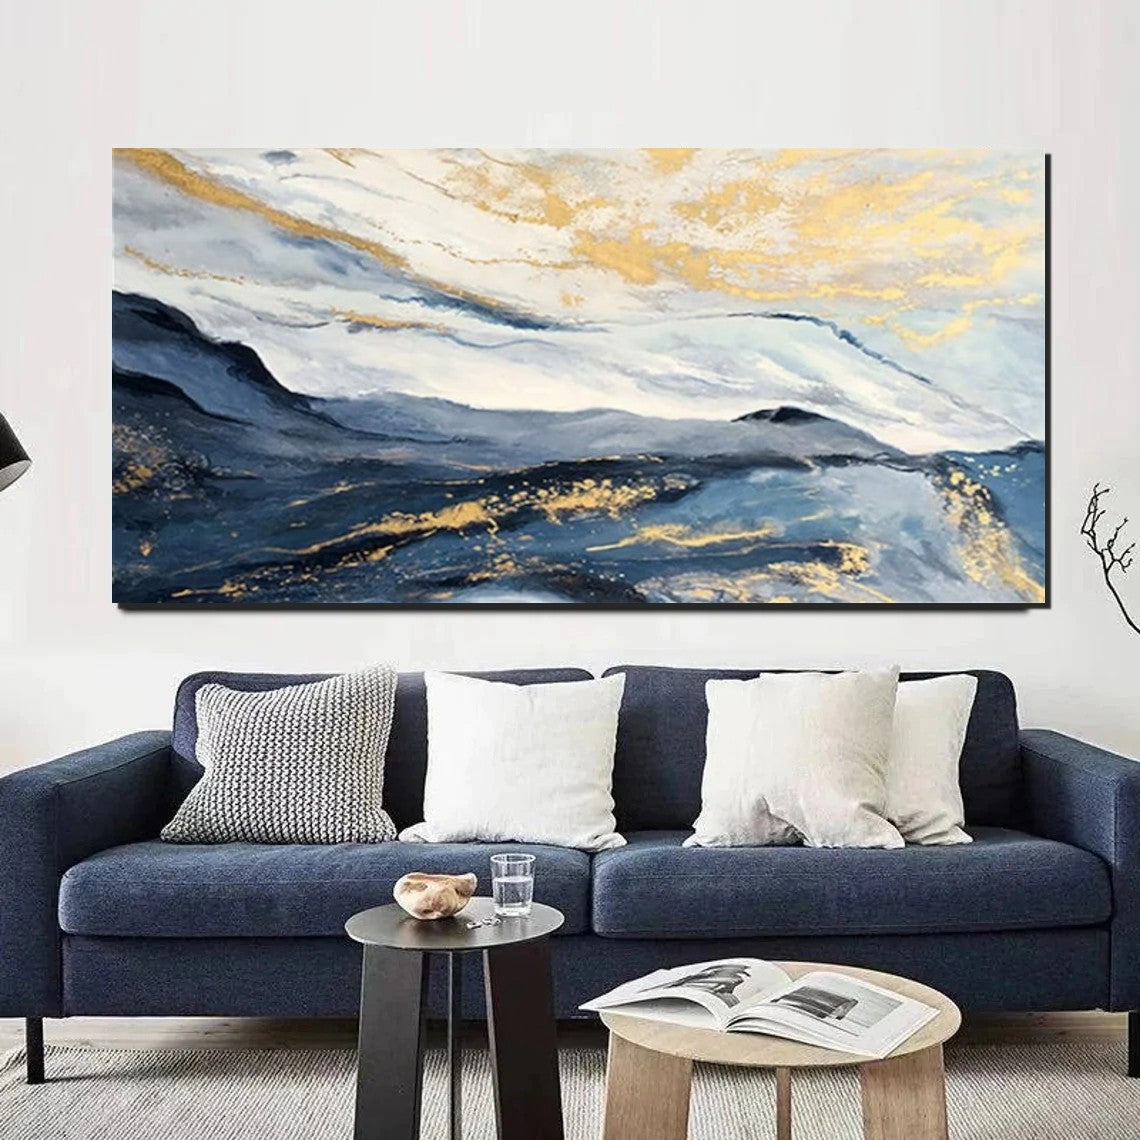 Large Painting on Canvas, Living Room Wall Art Paintings, Acrylic Abst